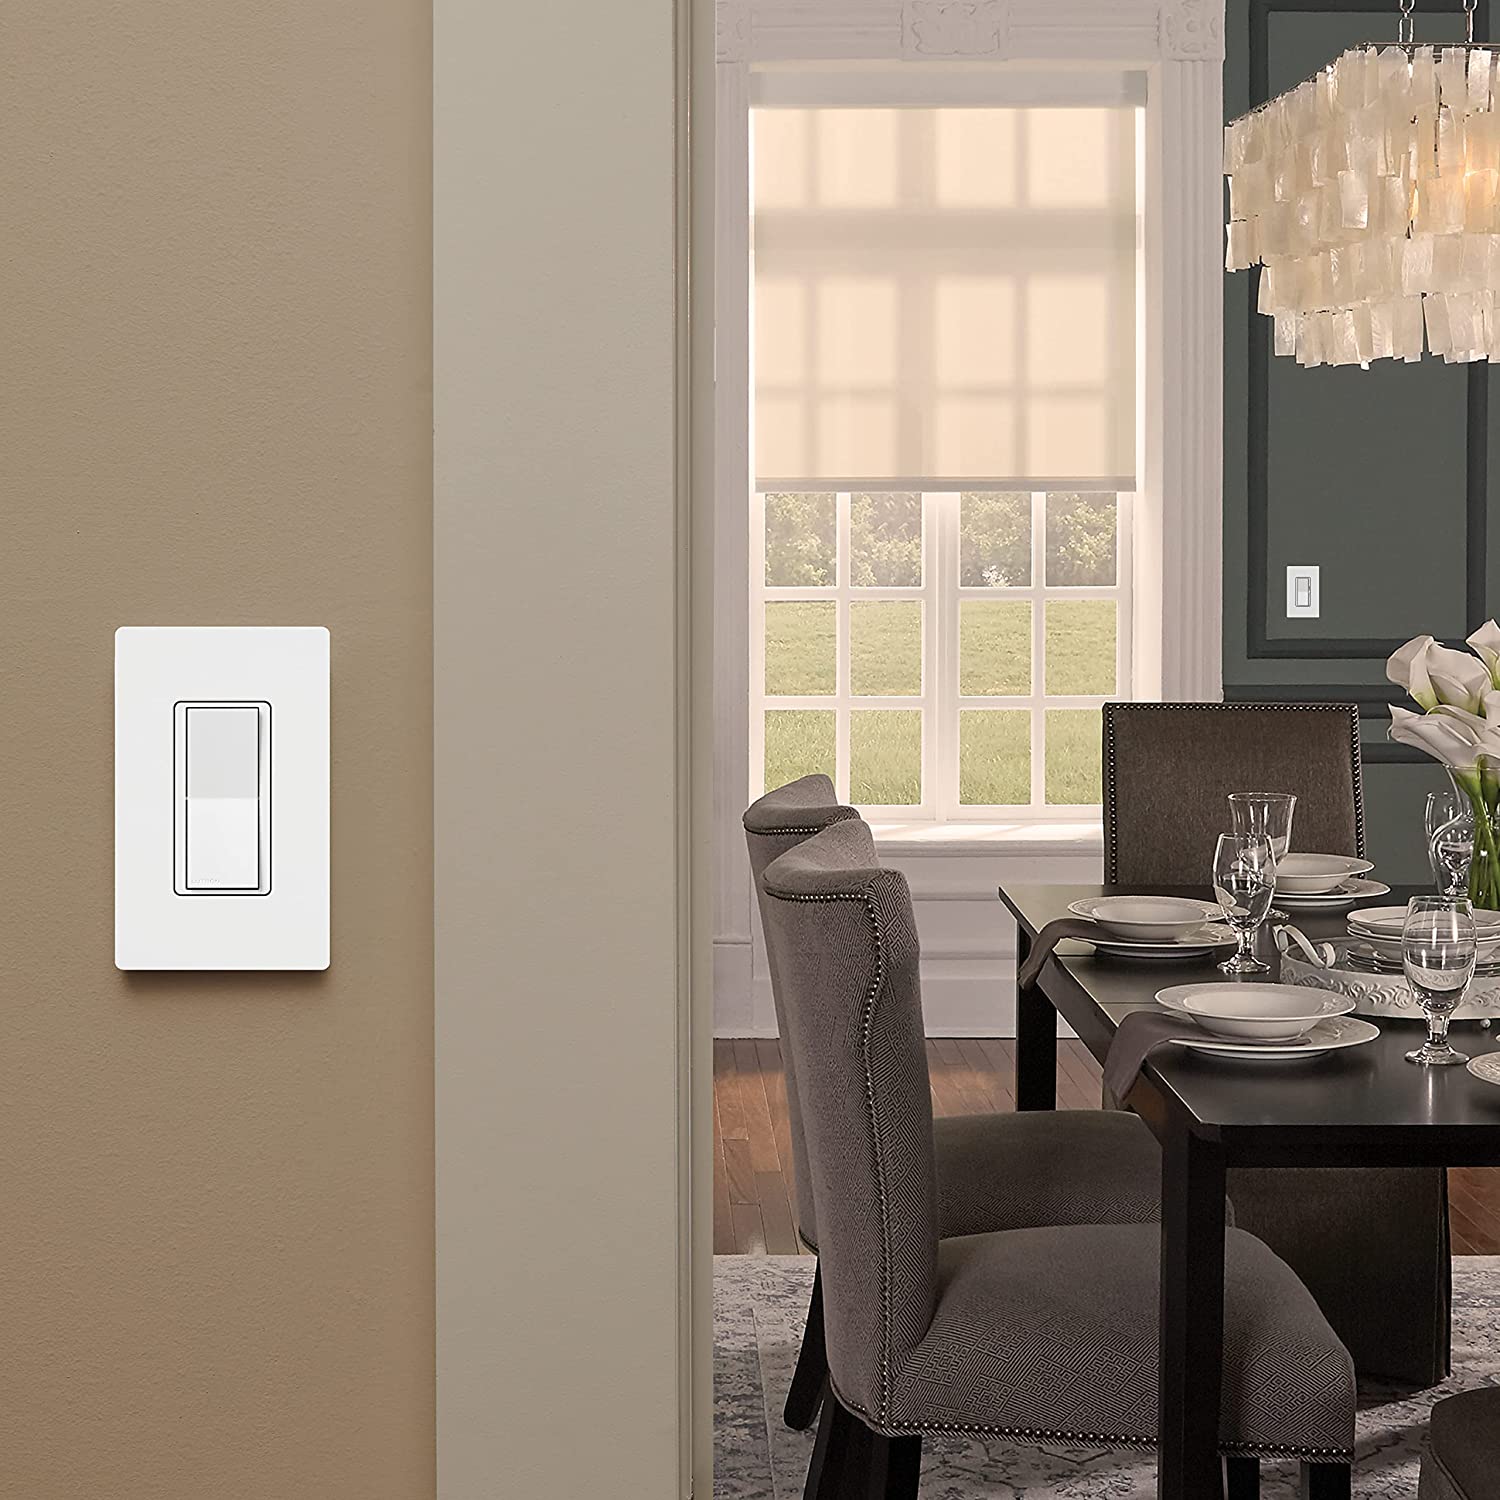 Lutron Claro Smart Accessory Switch, only for use with Diva Smart Dimmer Switch/Claro Smart Switch | DVRF-AS-WH | White